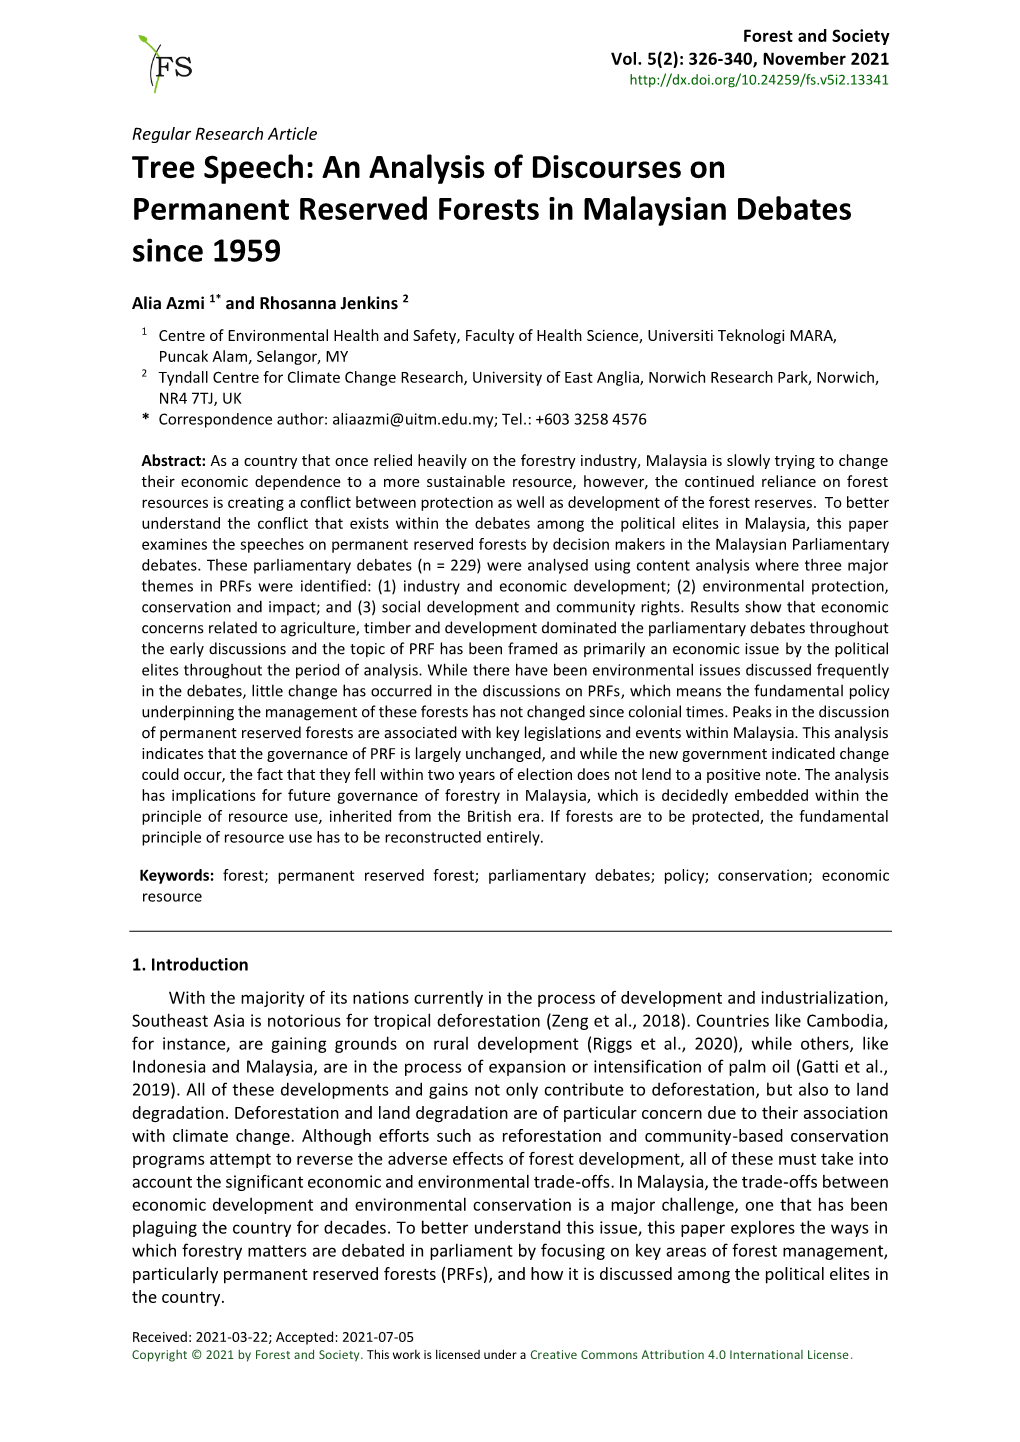 An Analysis of Discourses on Permanent Reserved Forests in Malaysian Debates Since 1959